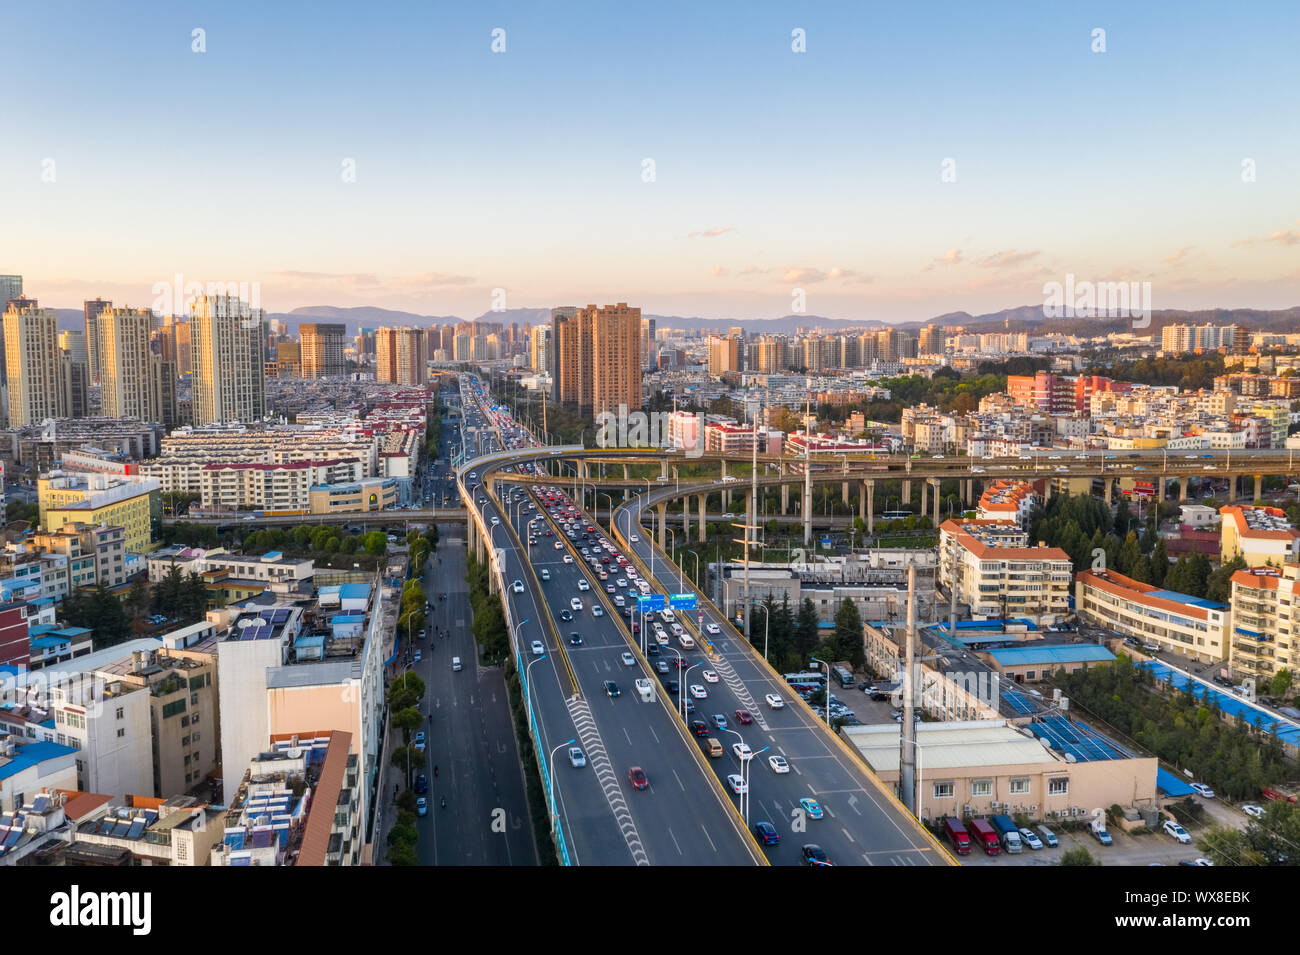 aerial view of elevated road at dusk Stock Photo